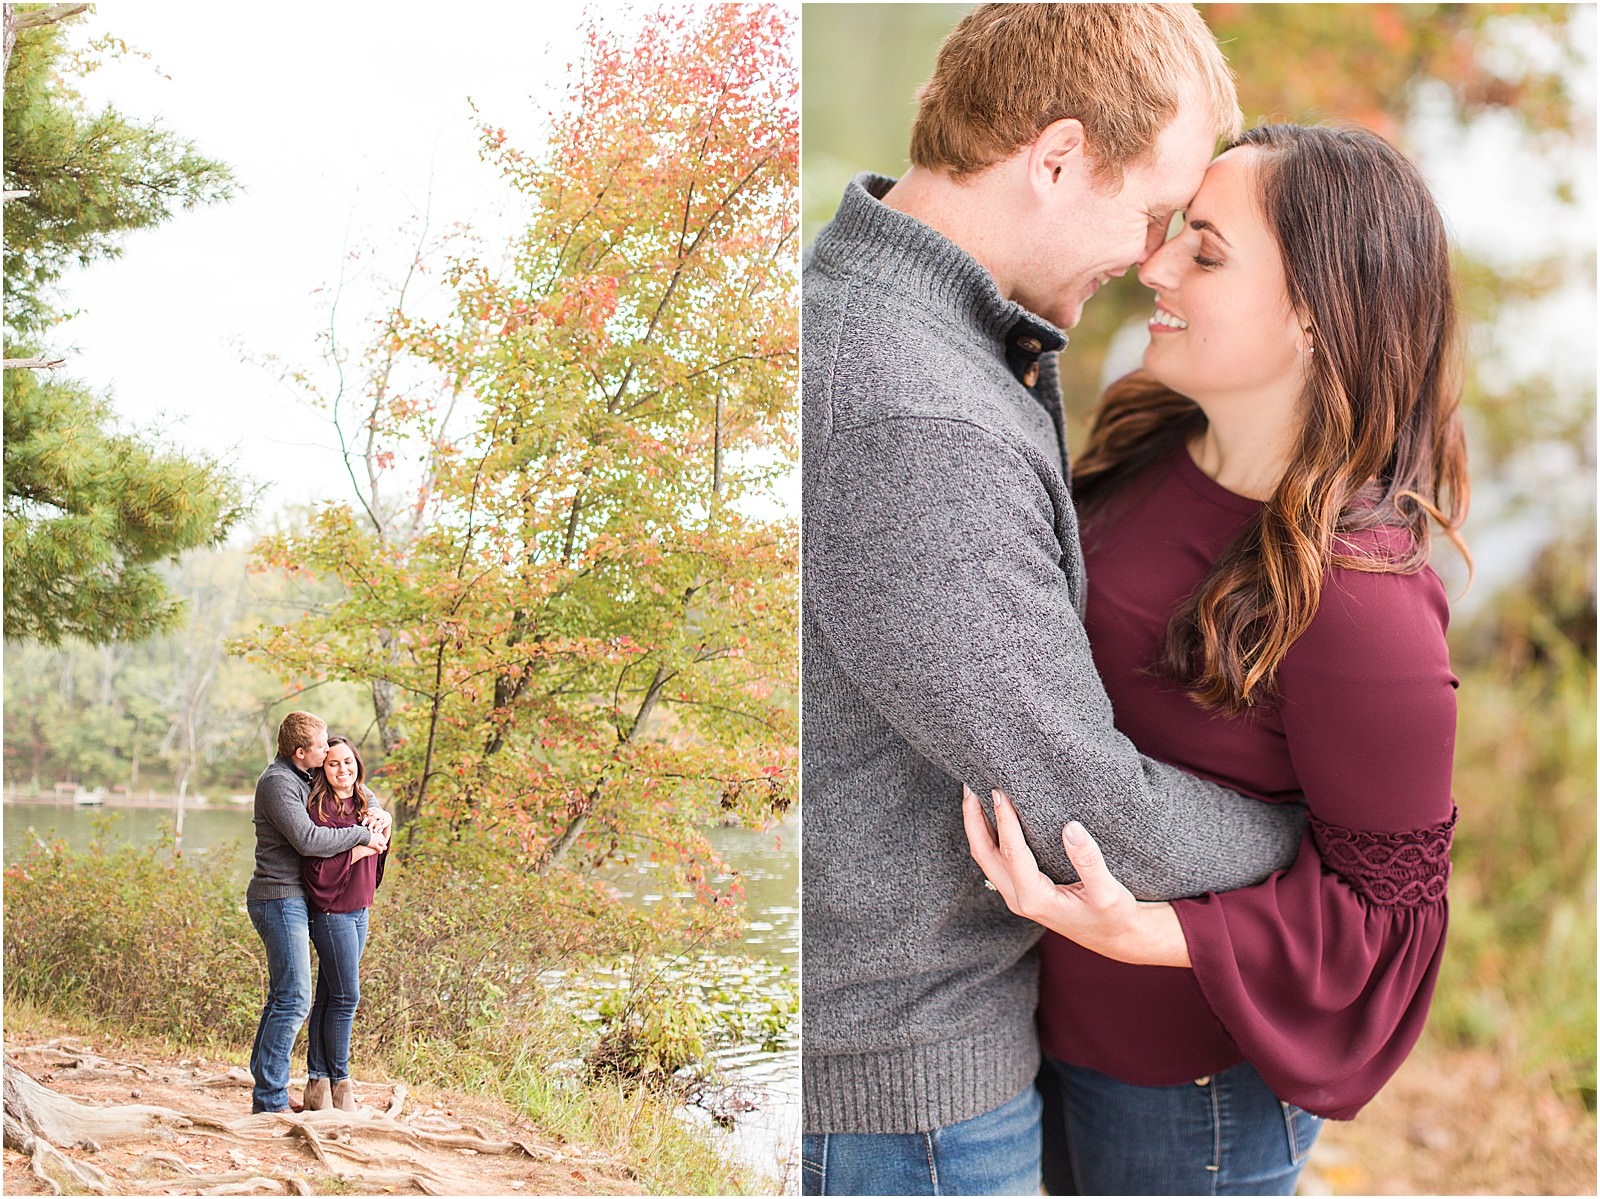 A Lincoln State Park Engagemtent Session | Deidra and Andrew | Bret and Brandie Photography 0022.jpg